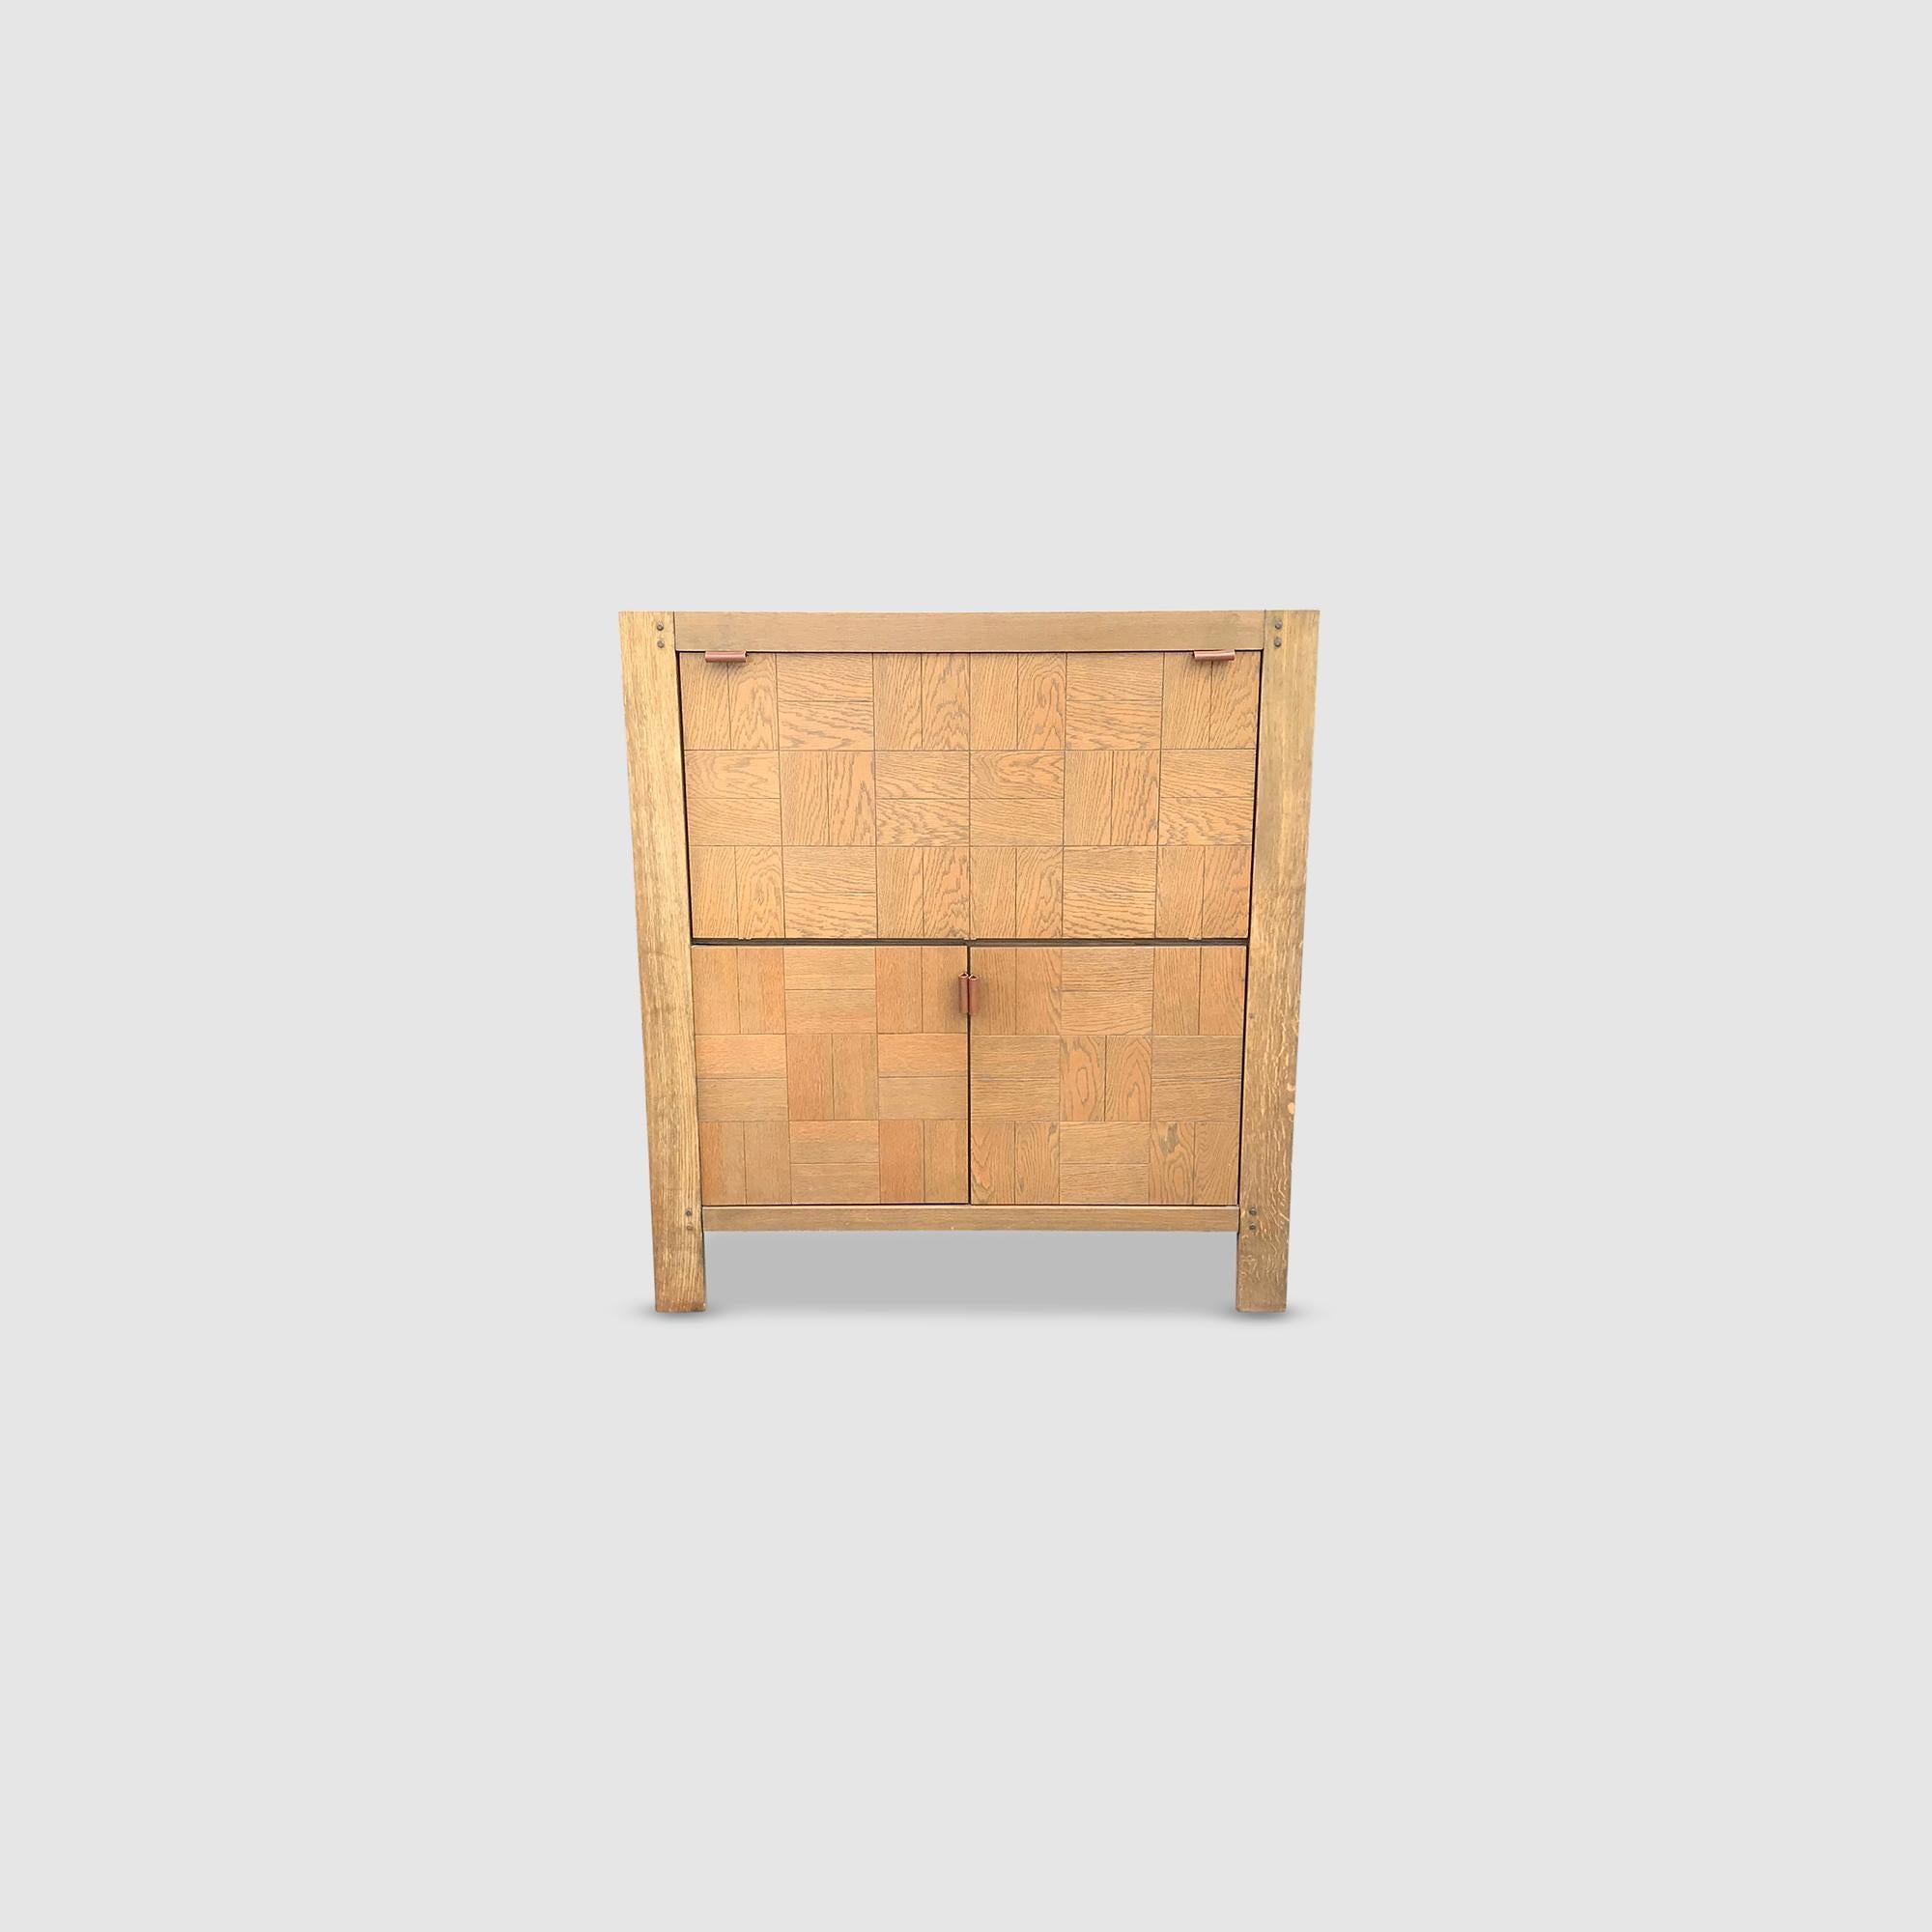 Impressive brutalist graphical oak highboard from Belgian origin, likely to have come out of the Aurora factory in Izegem Belgium.

These highboards are often attributed to De Coene but they are of a different origin.

The highboard is beautifully